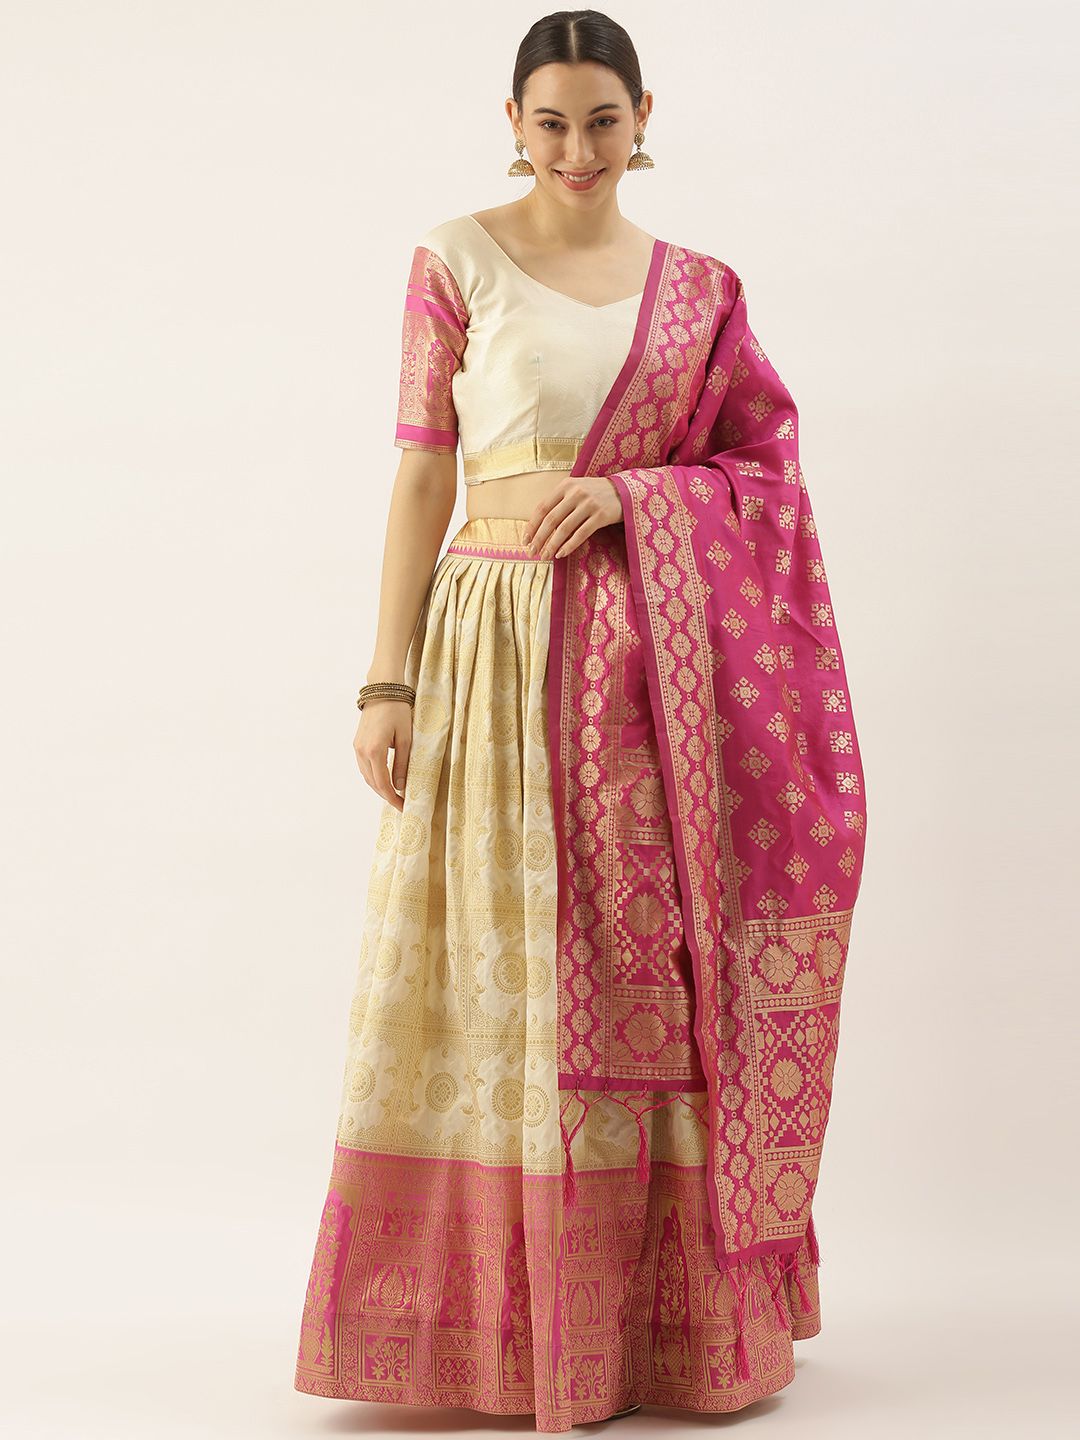 LOOKNBOOK ART Cream & Gold-Toned Semi-Stitched Lehenga & Unstitched Blouse With Dupatta Price in India